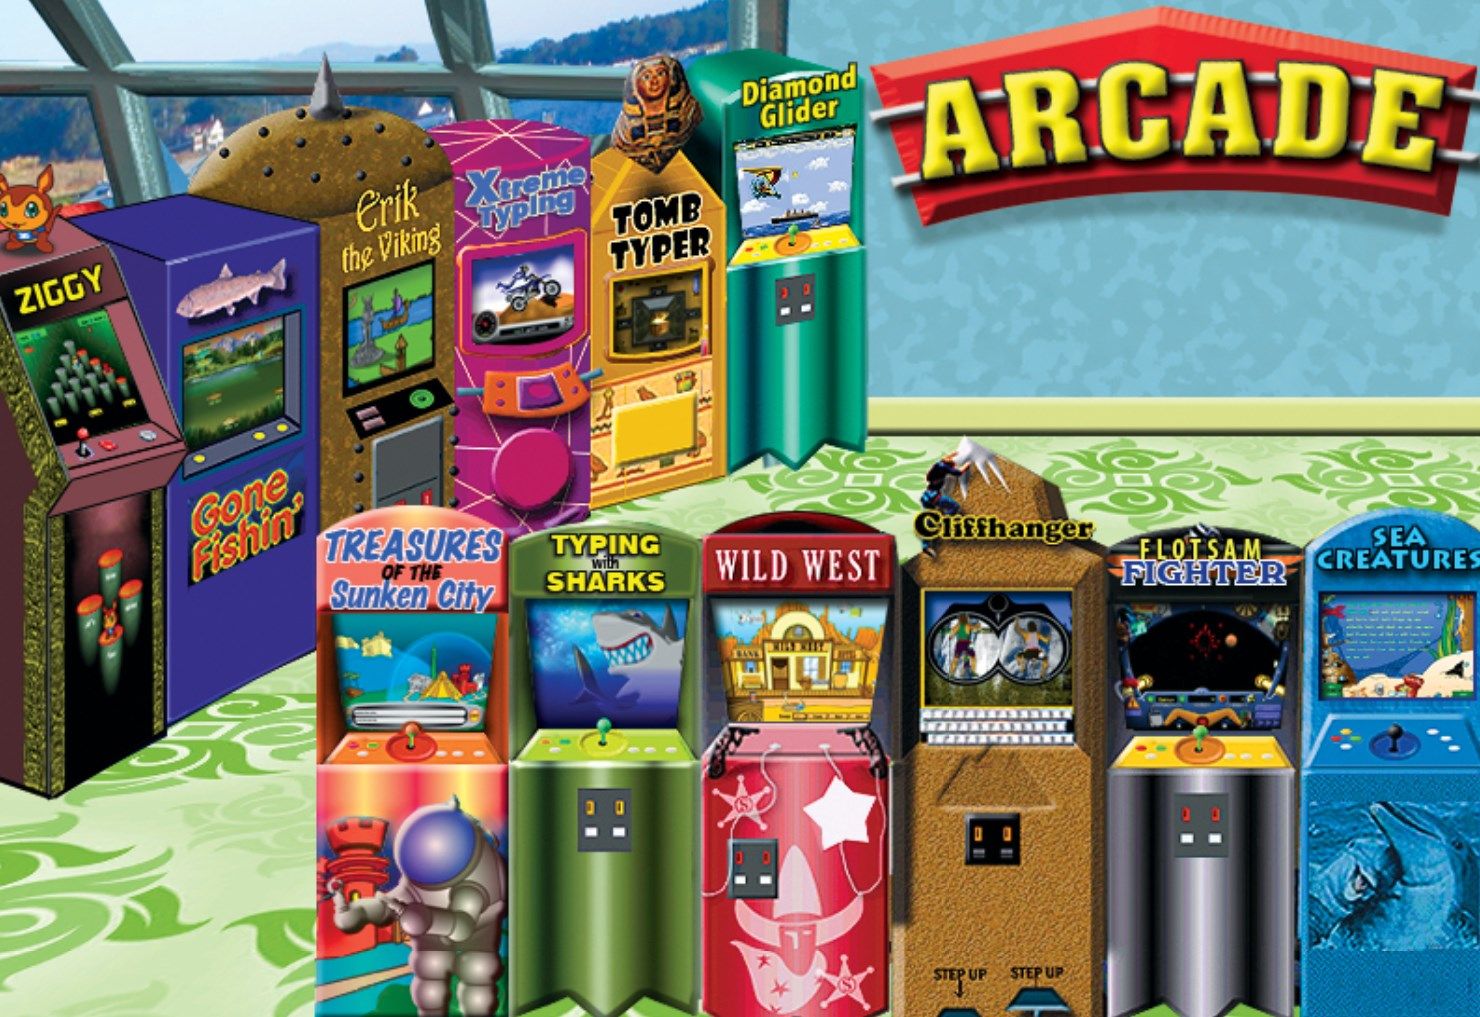 Visit the Arcade anytime to play challenging, multi-level games.